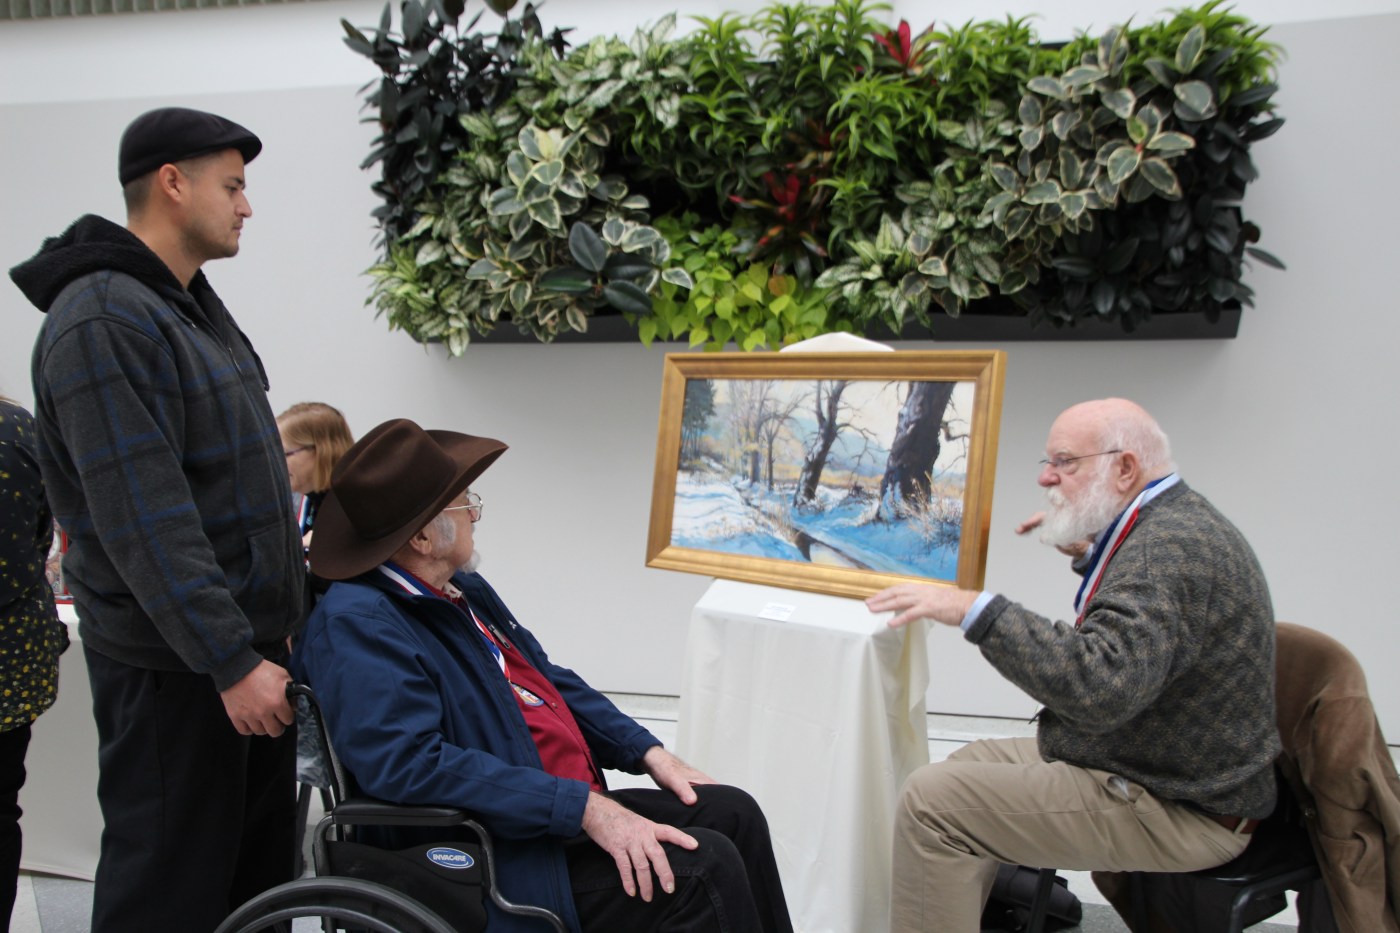 man shows his painting to visitors